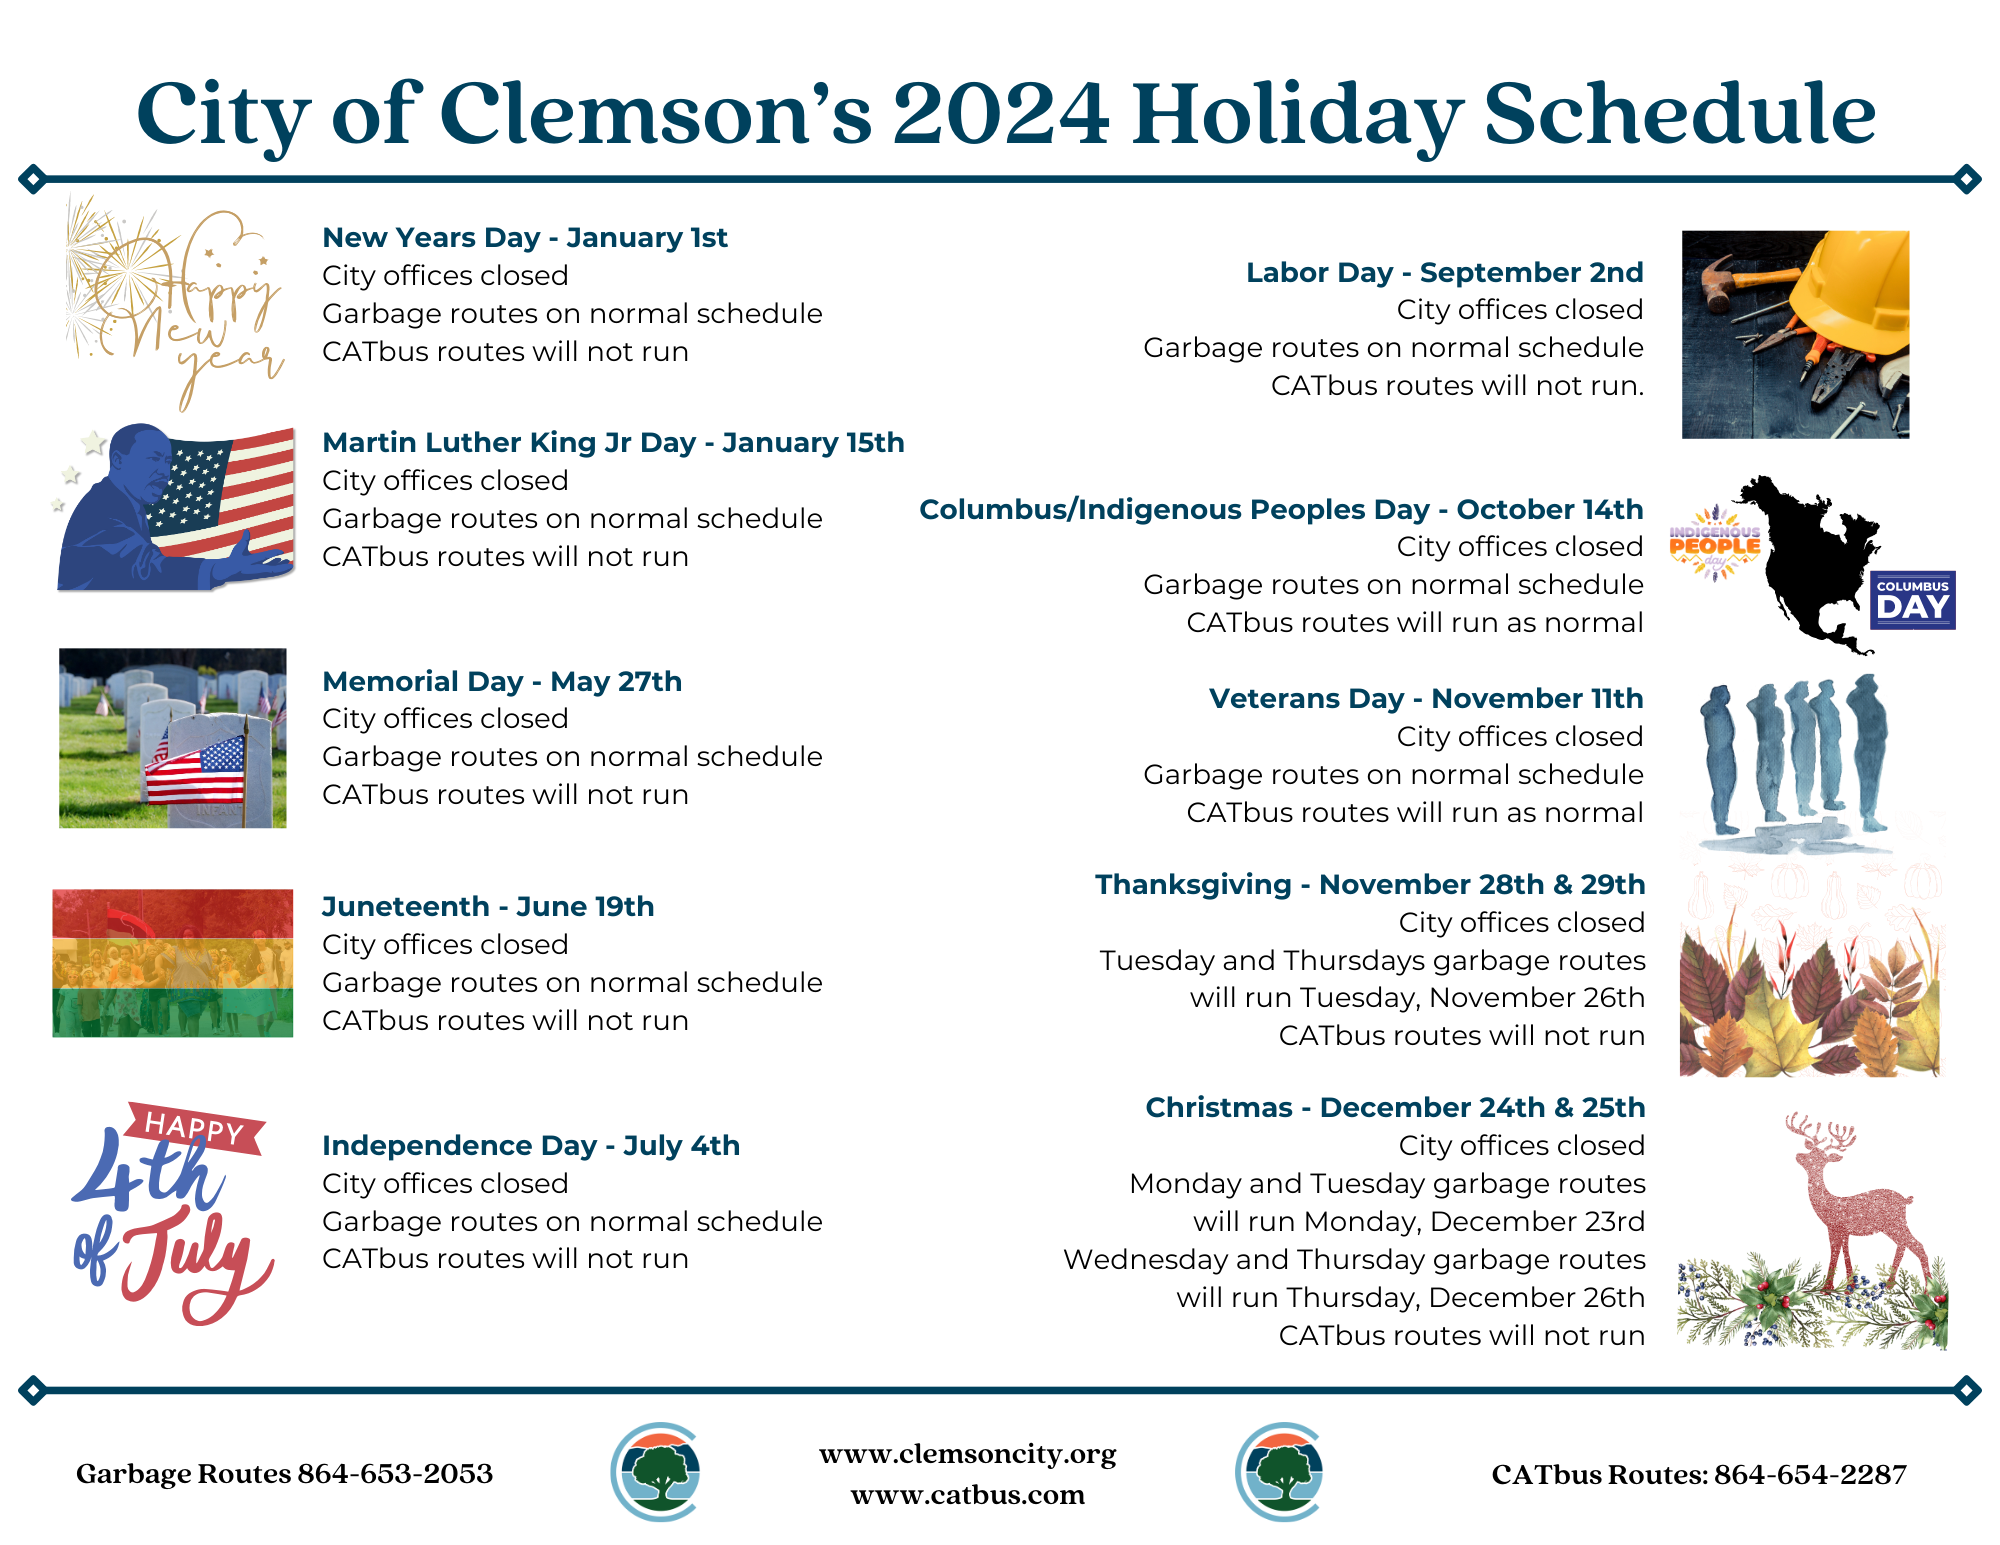 City of Clemson holiday schedule 2024 - click to download